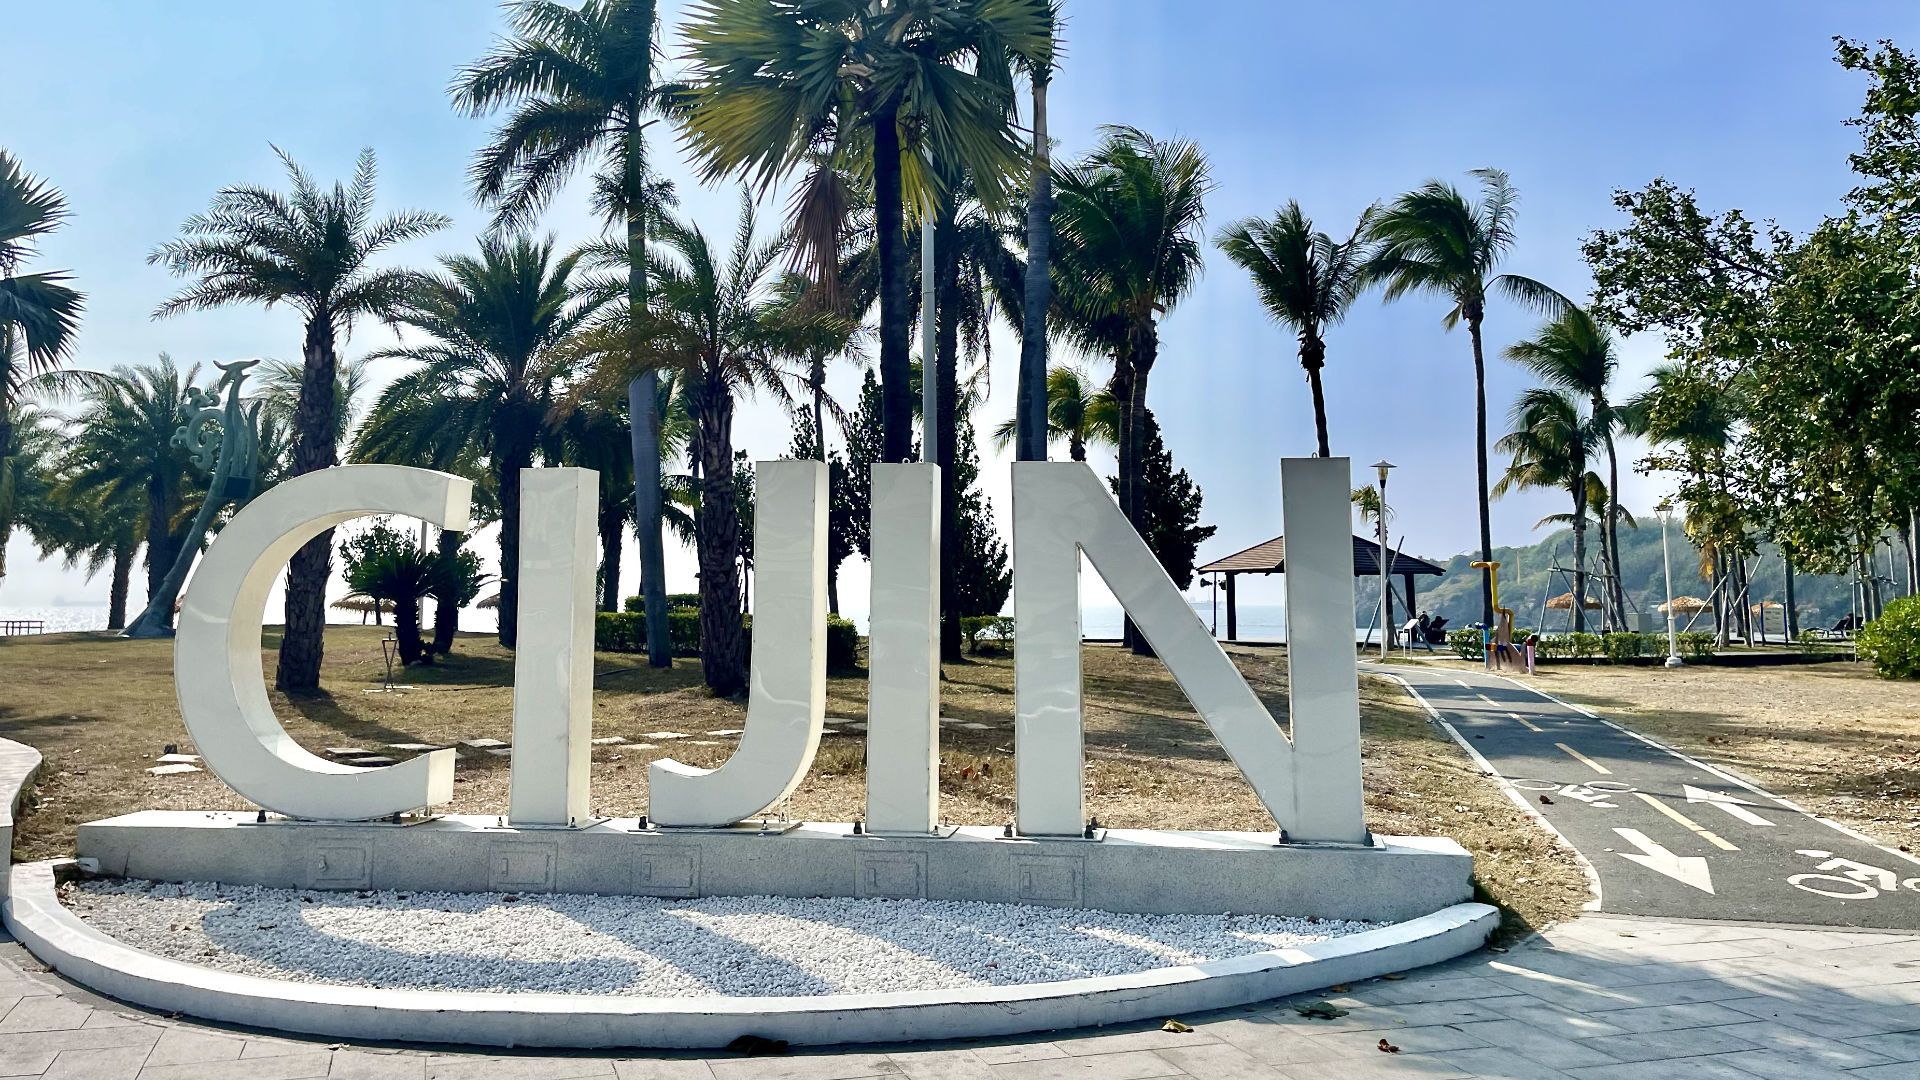 Cijin Island sign, with palm trees in the background.